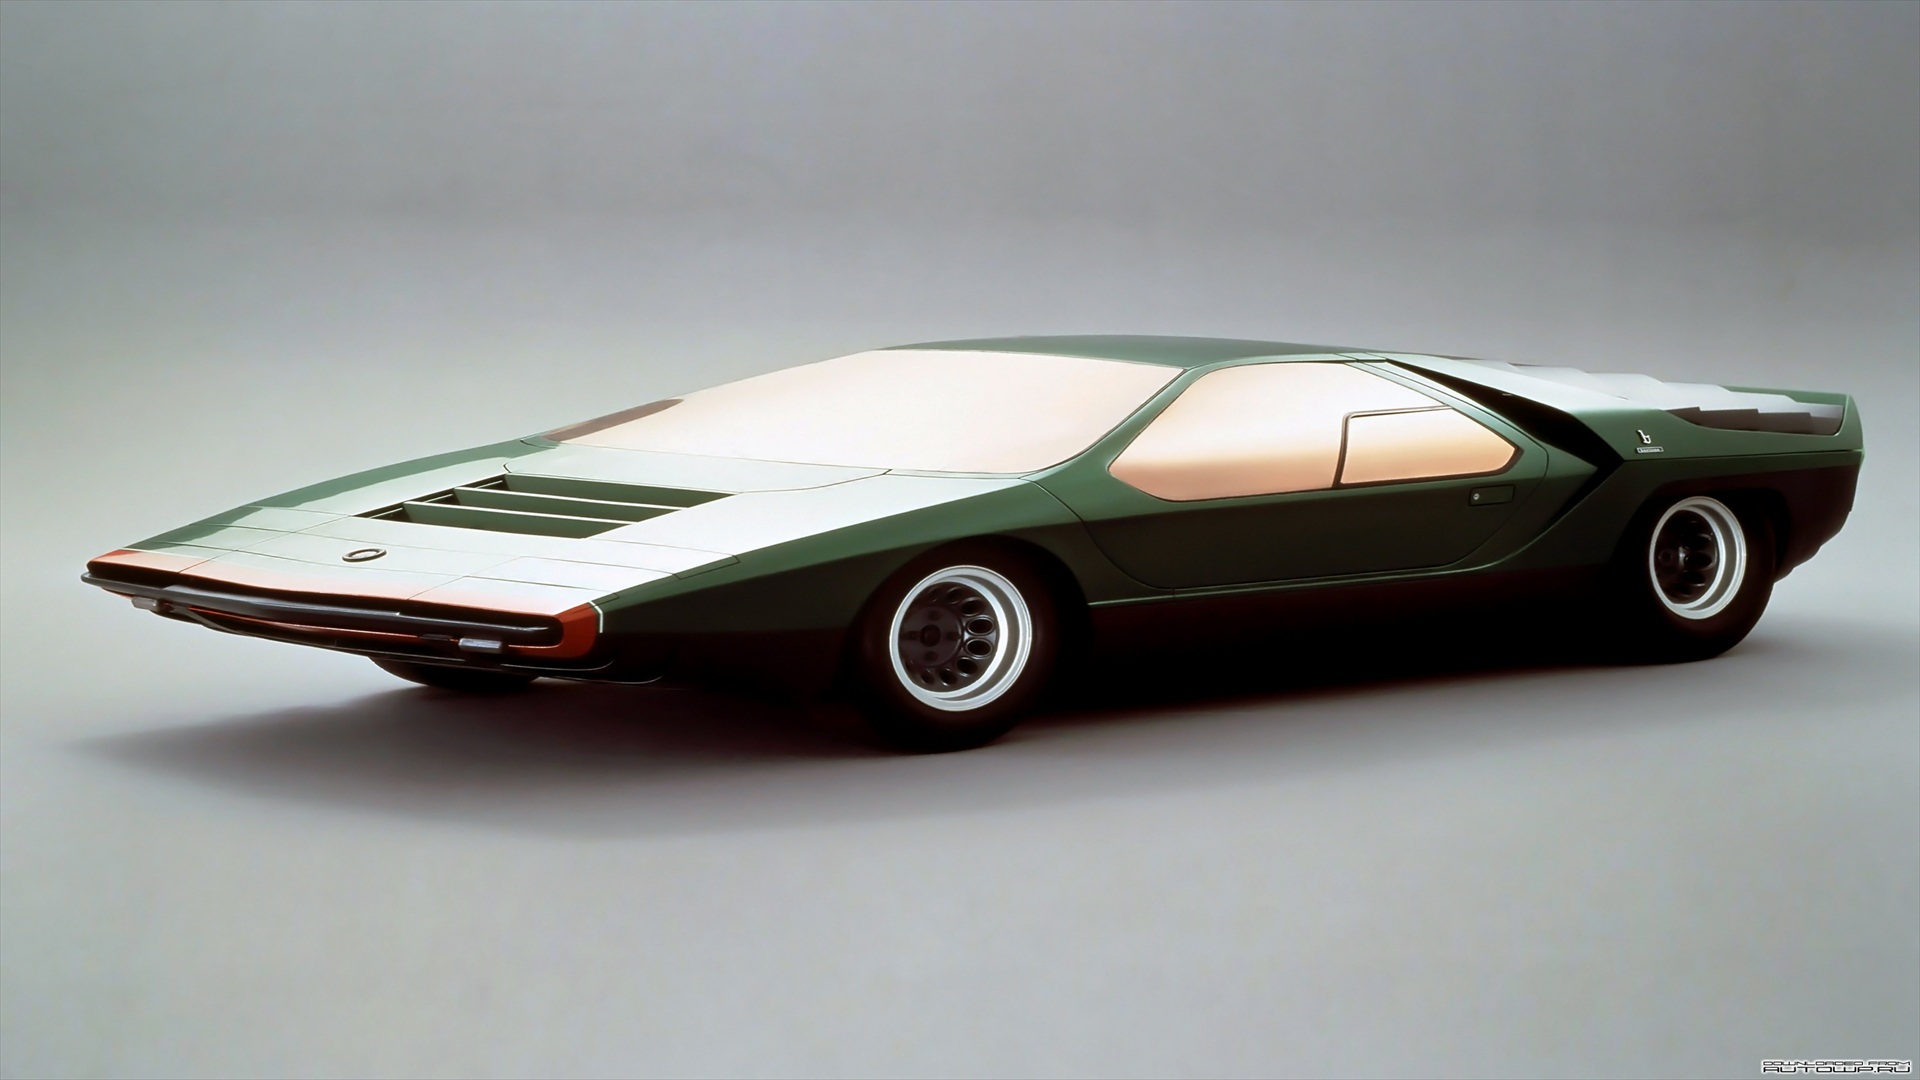 1968 Alfa Romeo Carabo Concept car in stunning green, showcasing innovative design for vehicle enthusiasts.